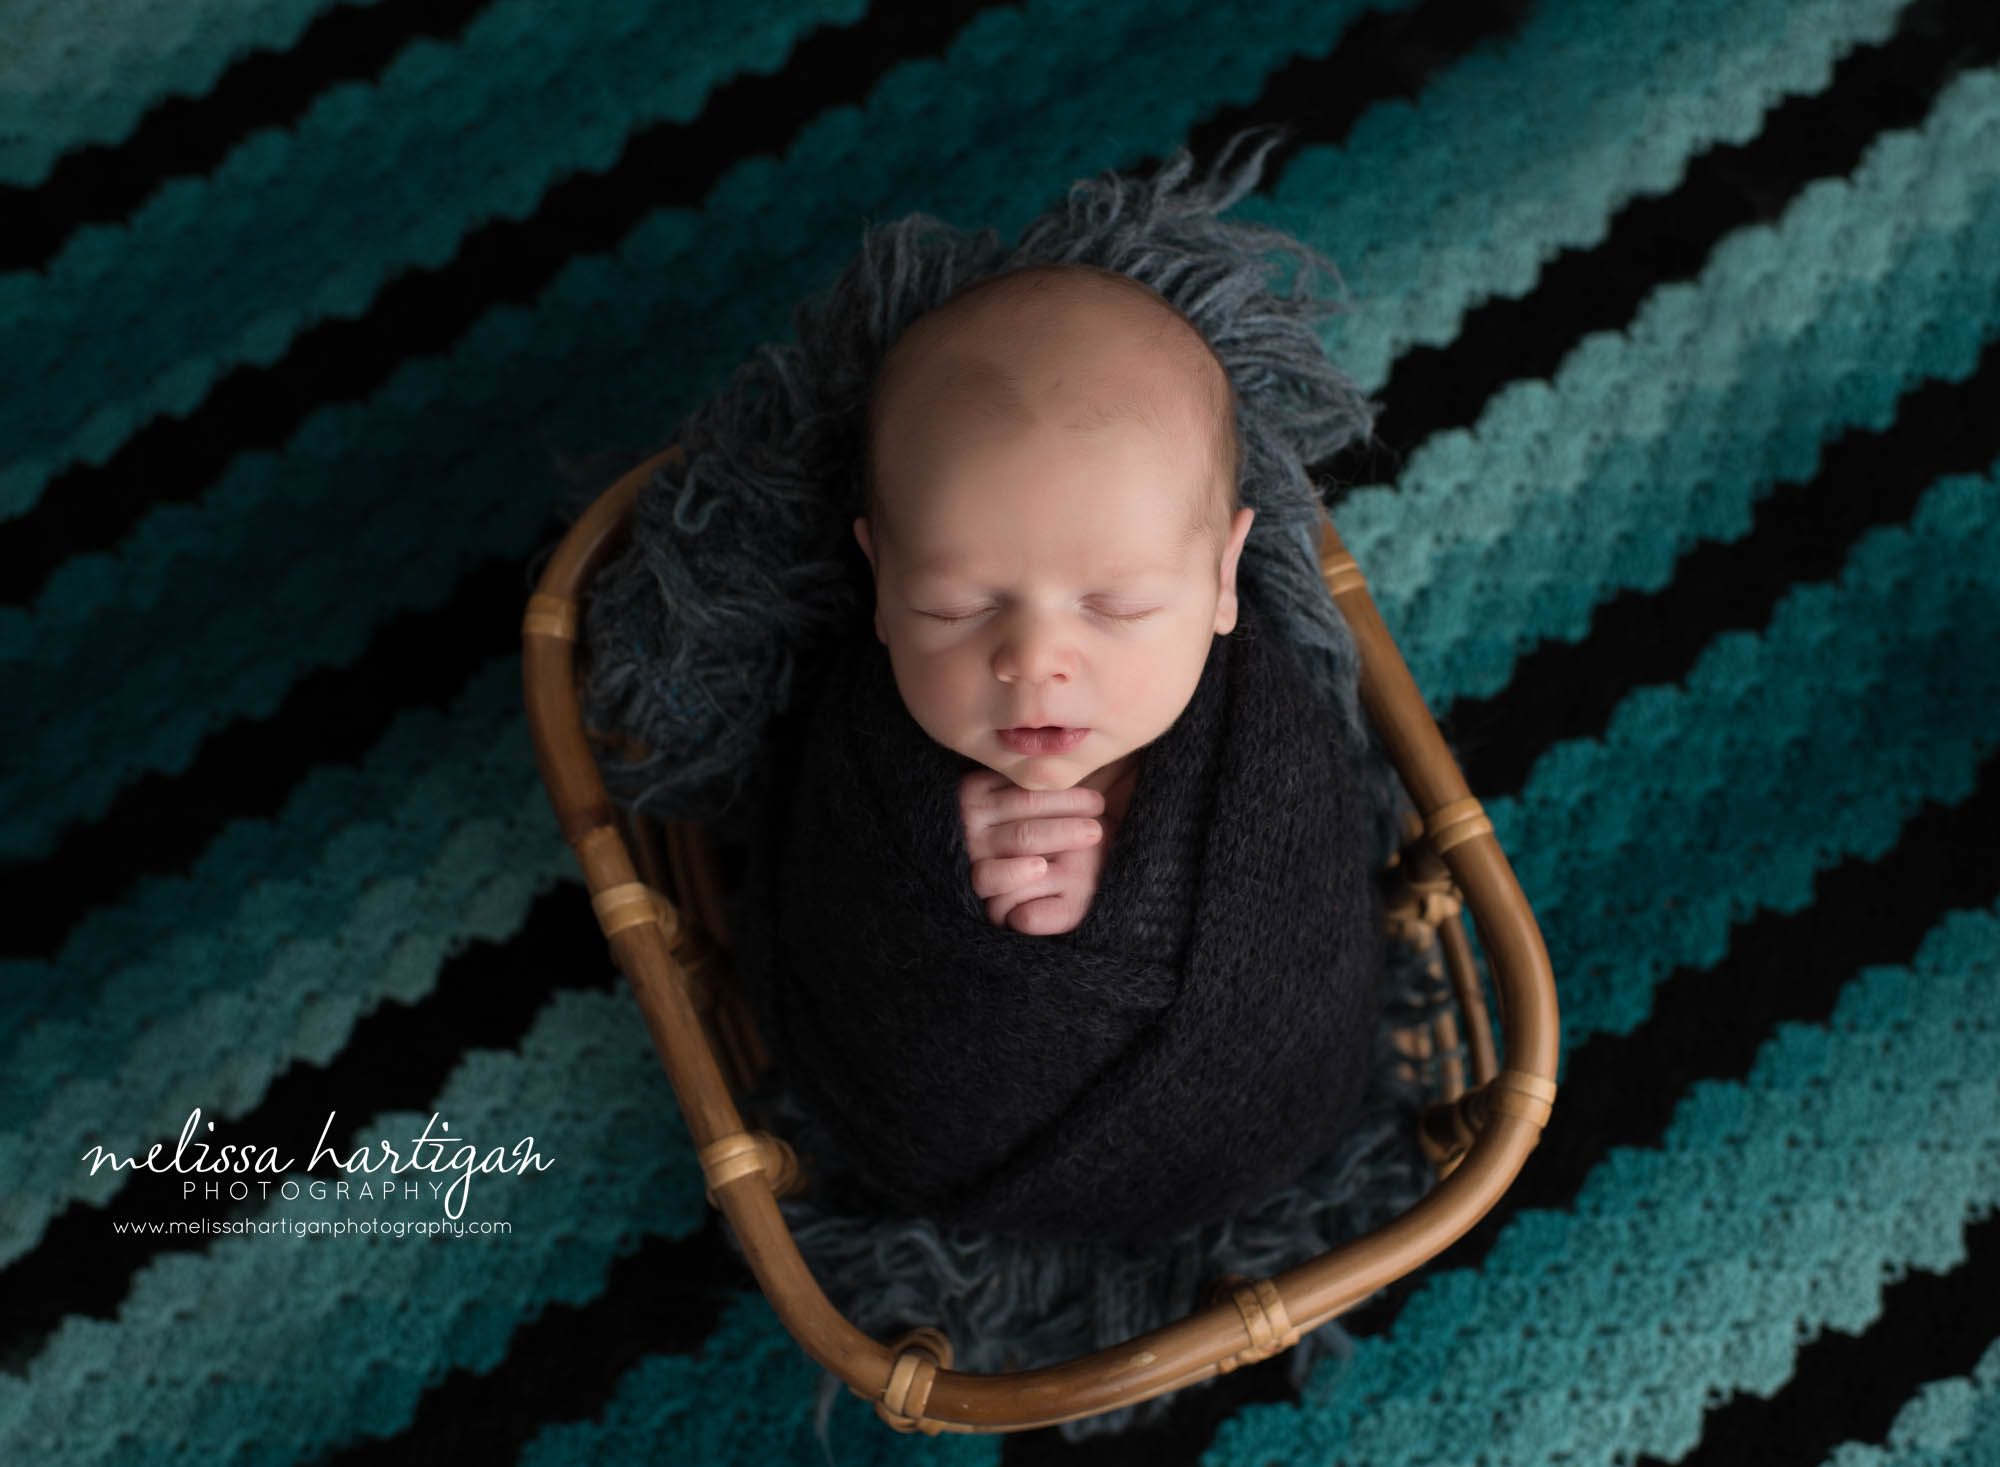 newborn baby boy wrapped in navy blue posed in basket with teal and black knitted baby blanket